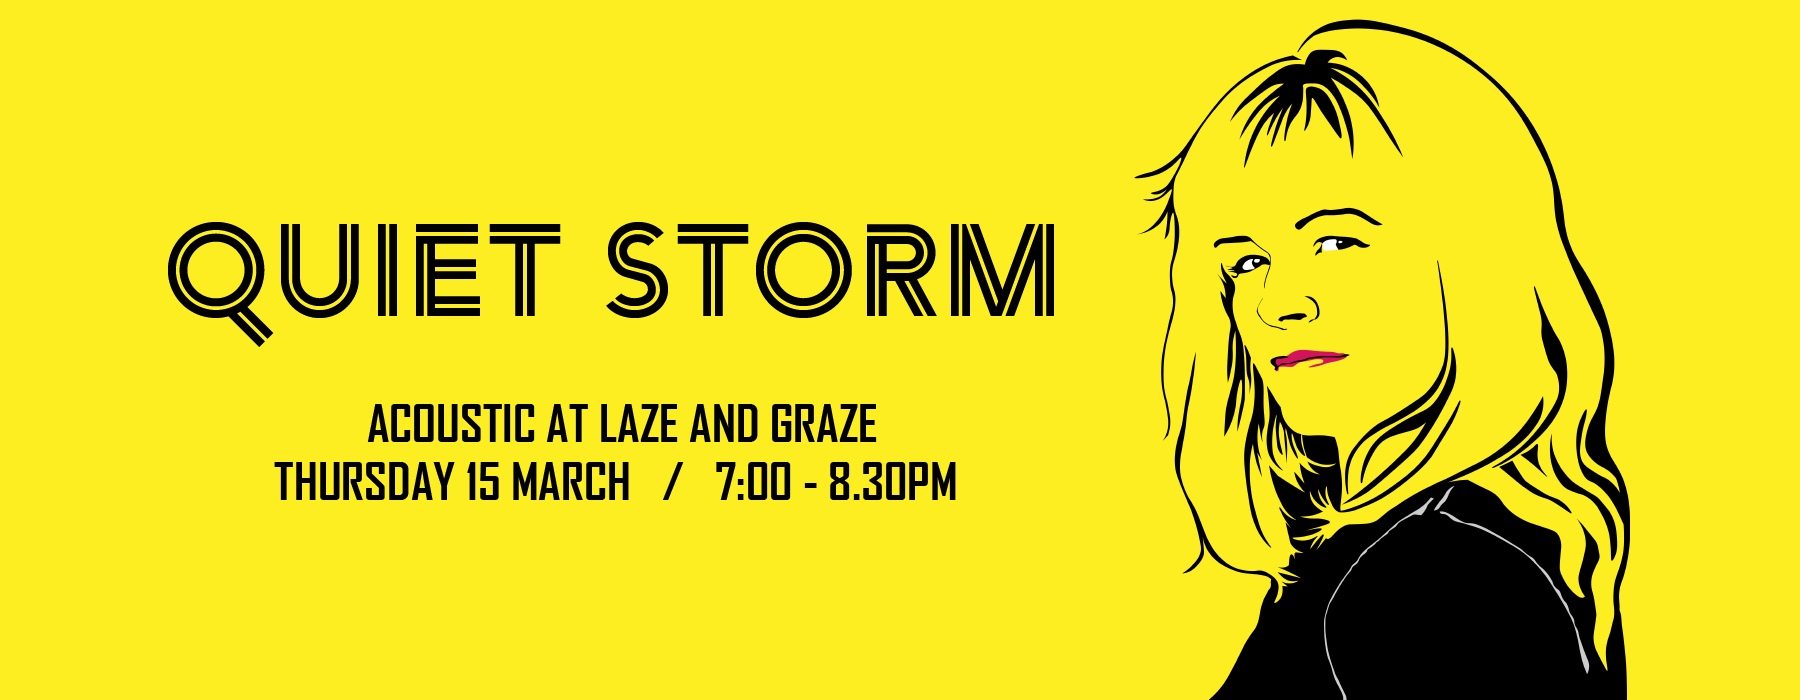 Acoustic at Laze and Graze: Thursday, 15 March